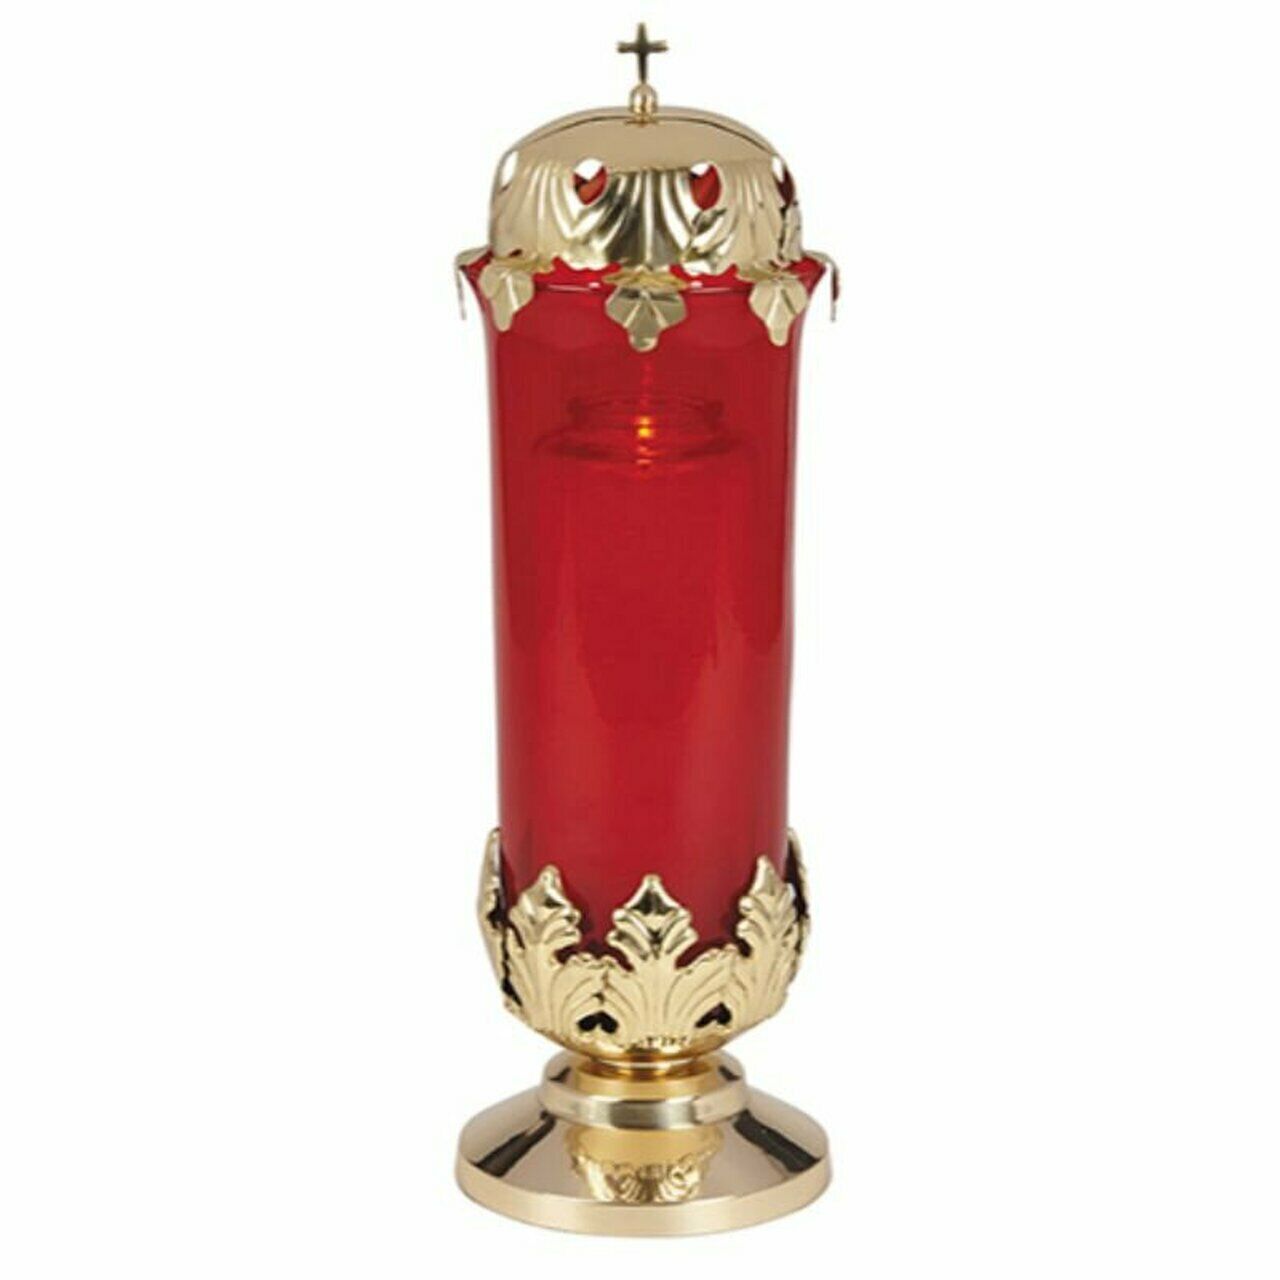 Sudbury Brass Sanctuary Cross Topped Glass Globe Candle Holder For Church, 14 In